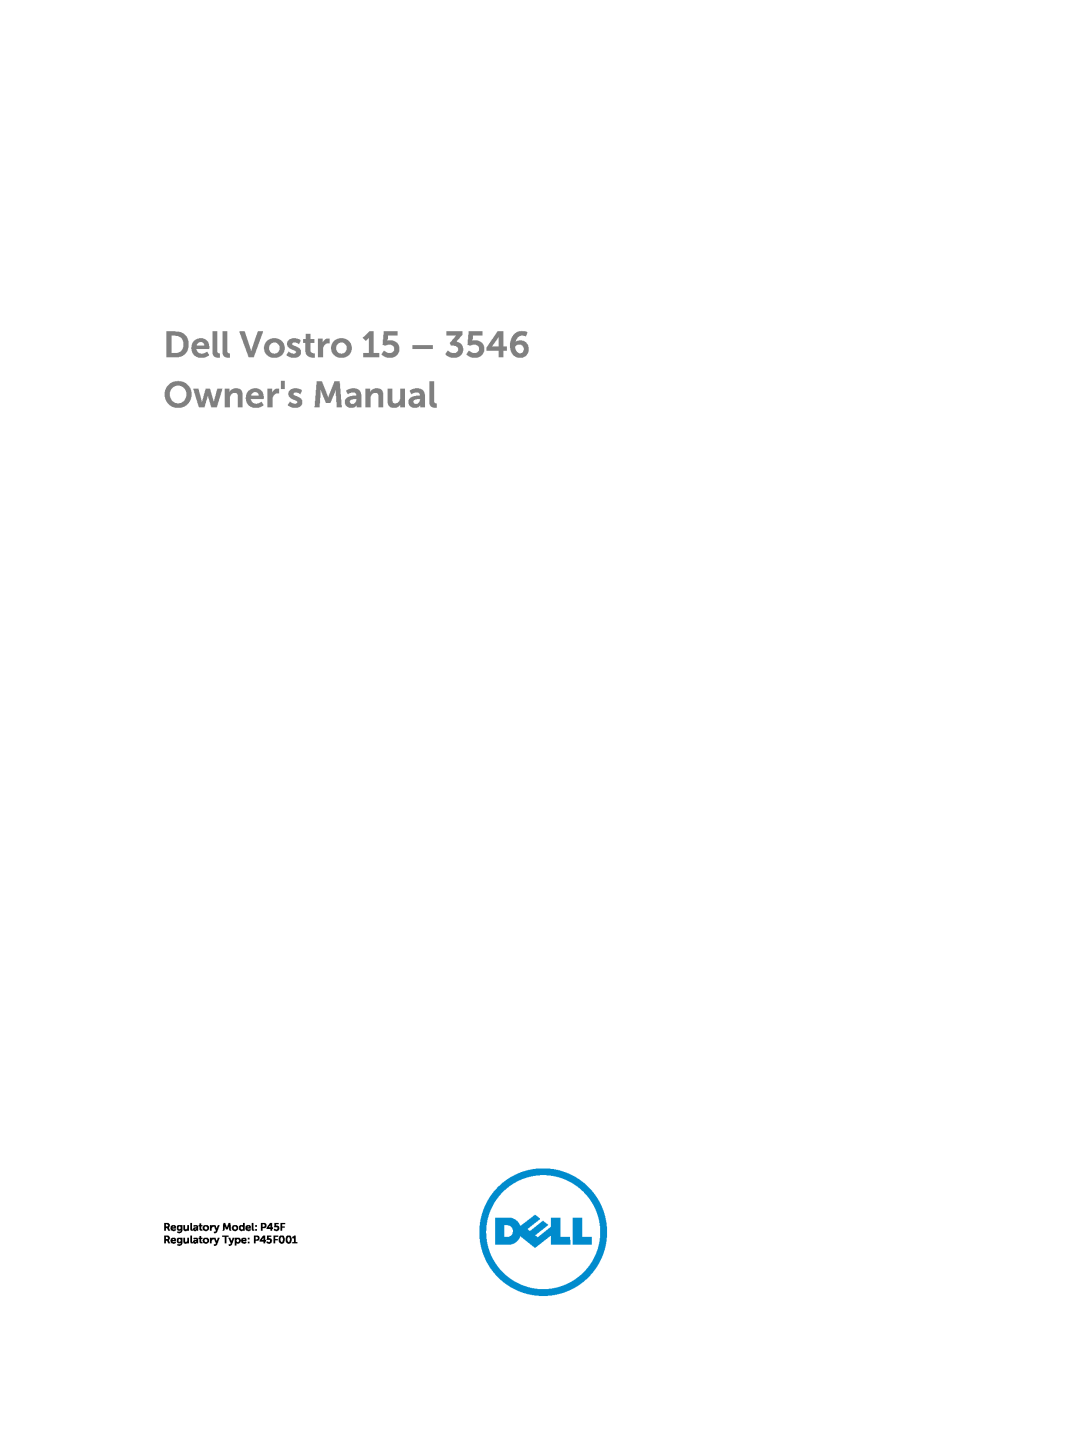 Dell owner manual Dell Vostro 15 Owners Manual, Regulatory Model P45F Regulatory Type P45F001 